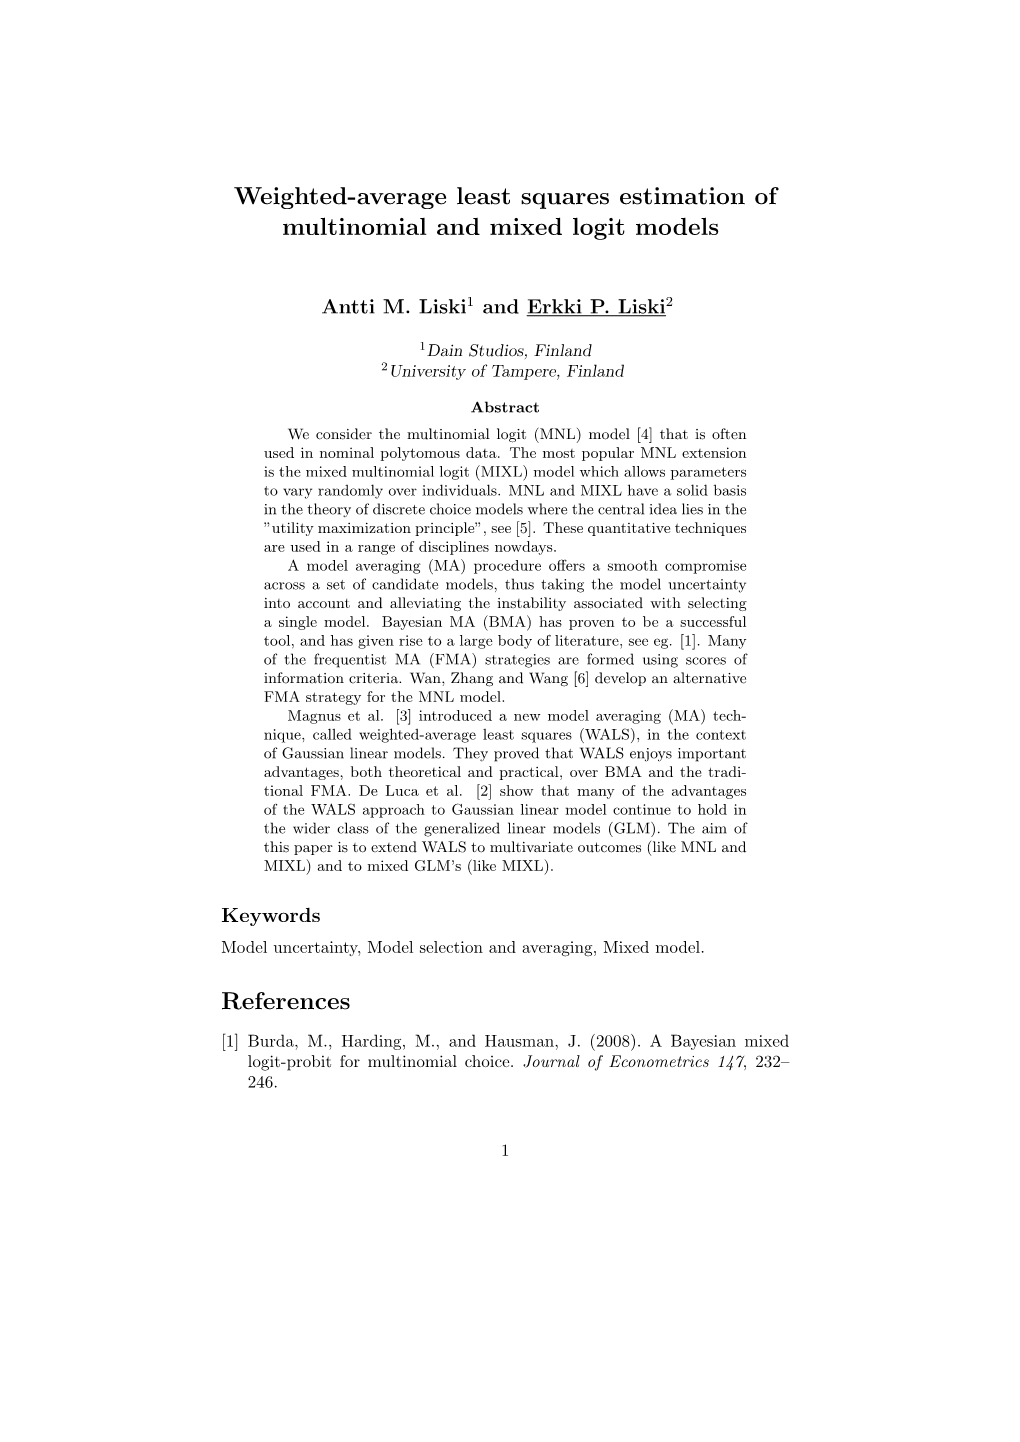 Weighted-Average Least Squares Estimation of Multinomial and Mixed Logit Models